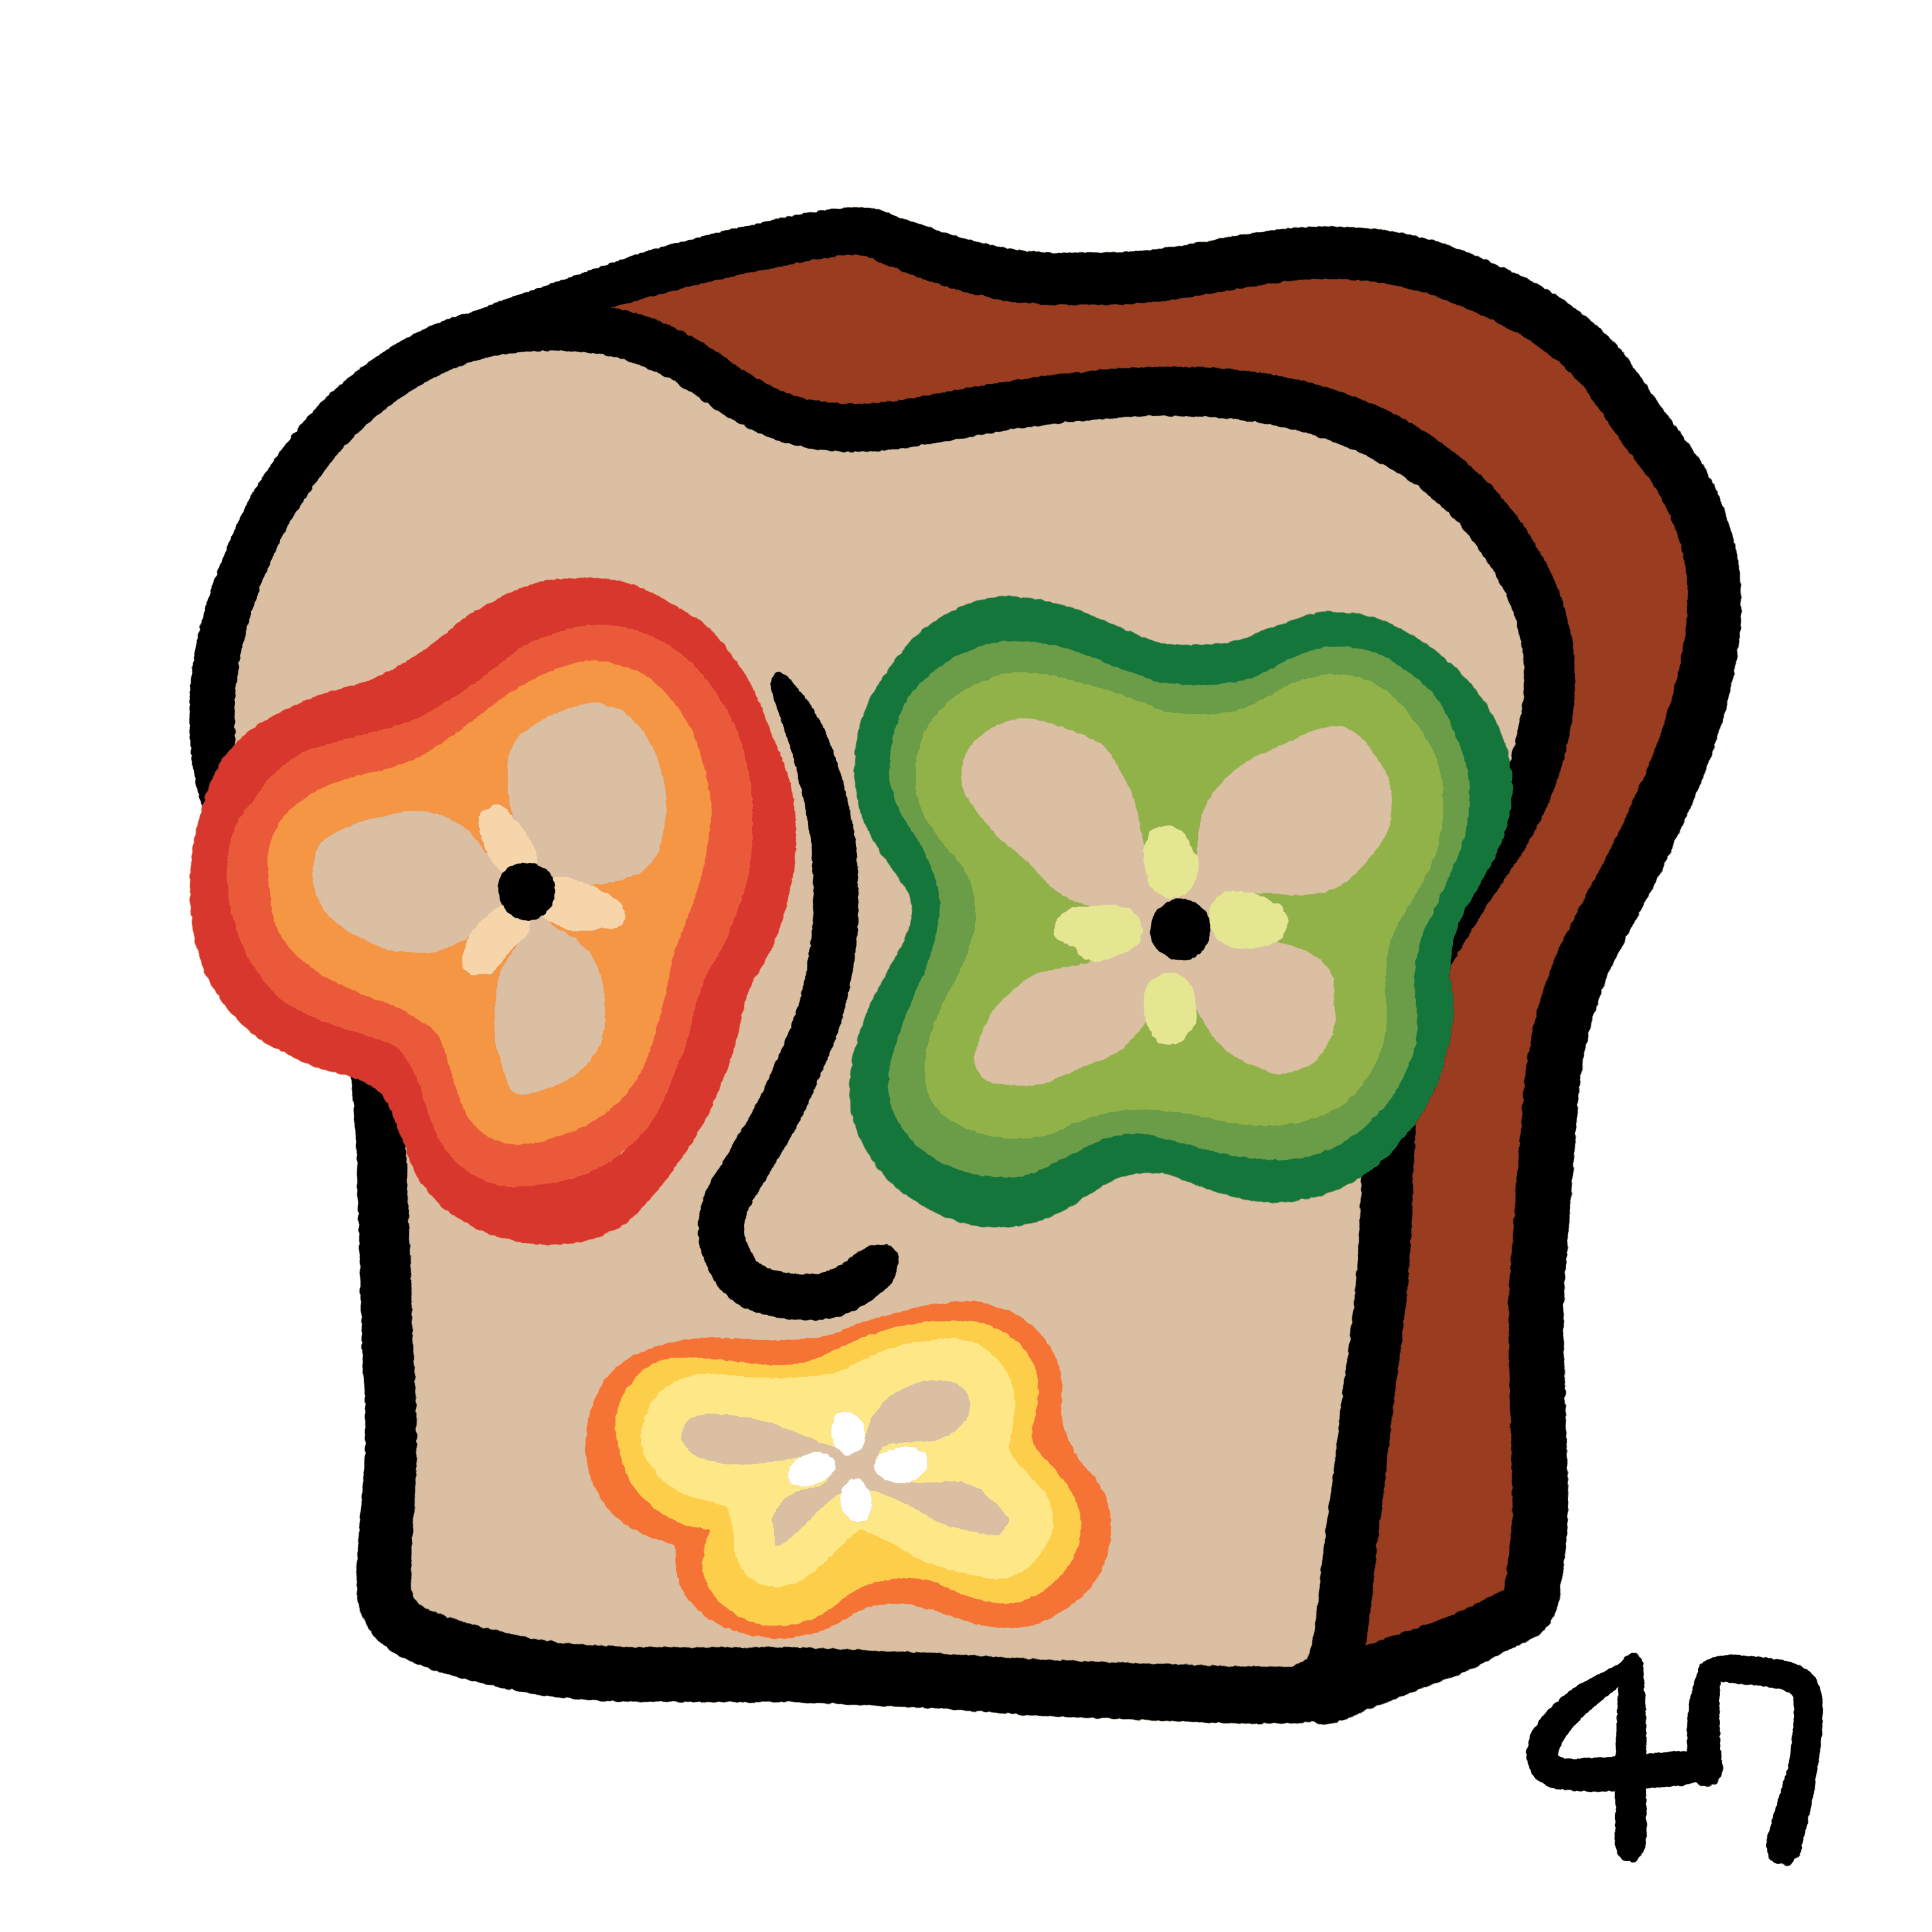 Bread and pepper